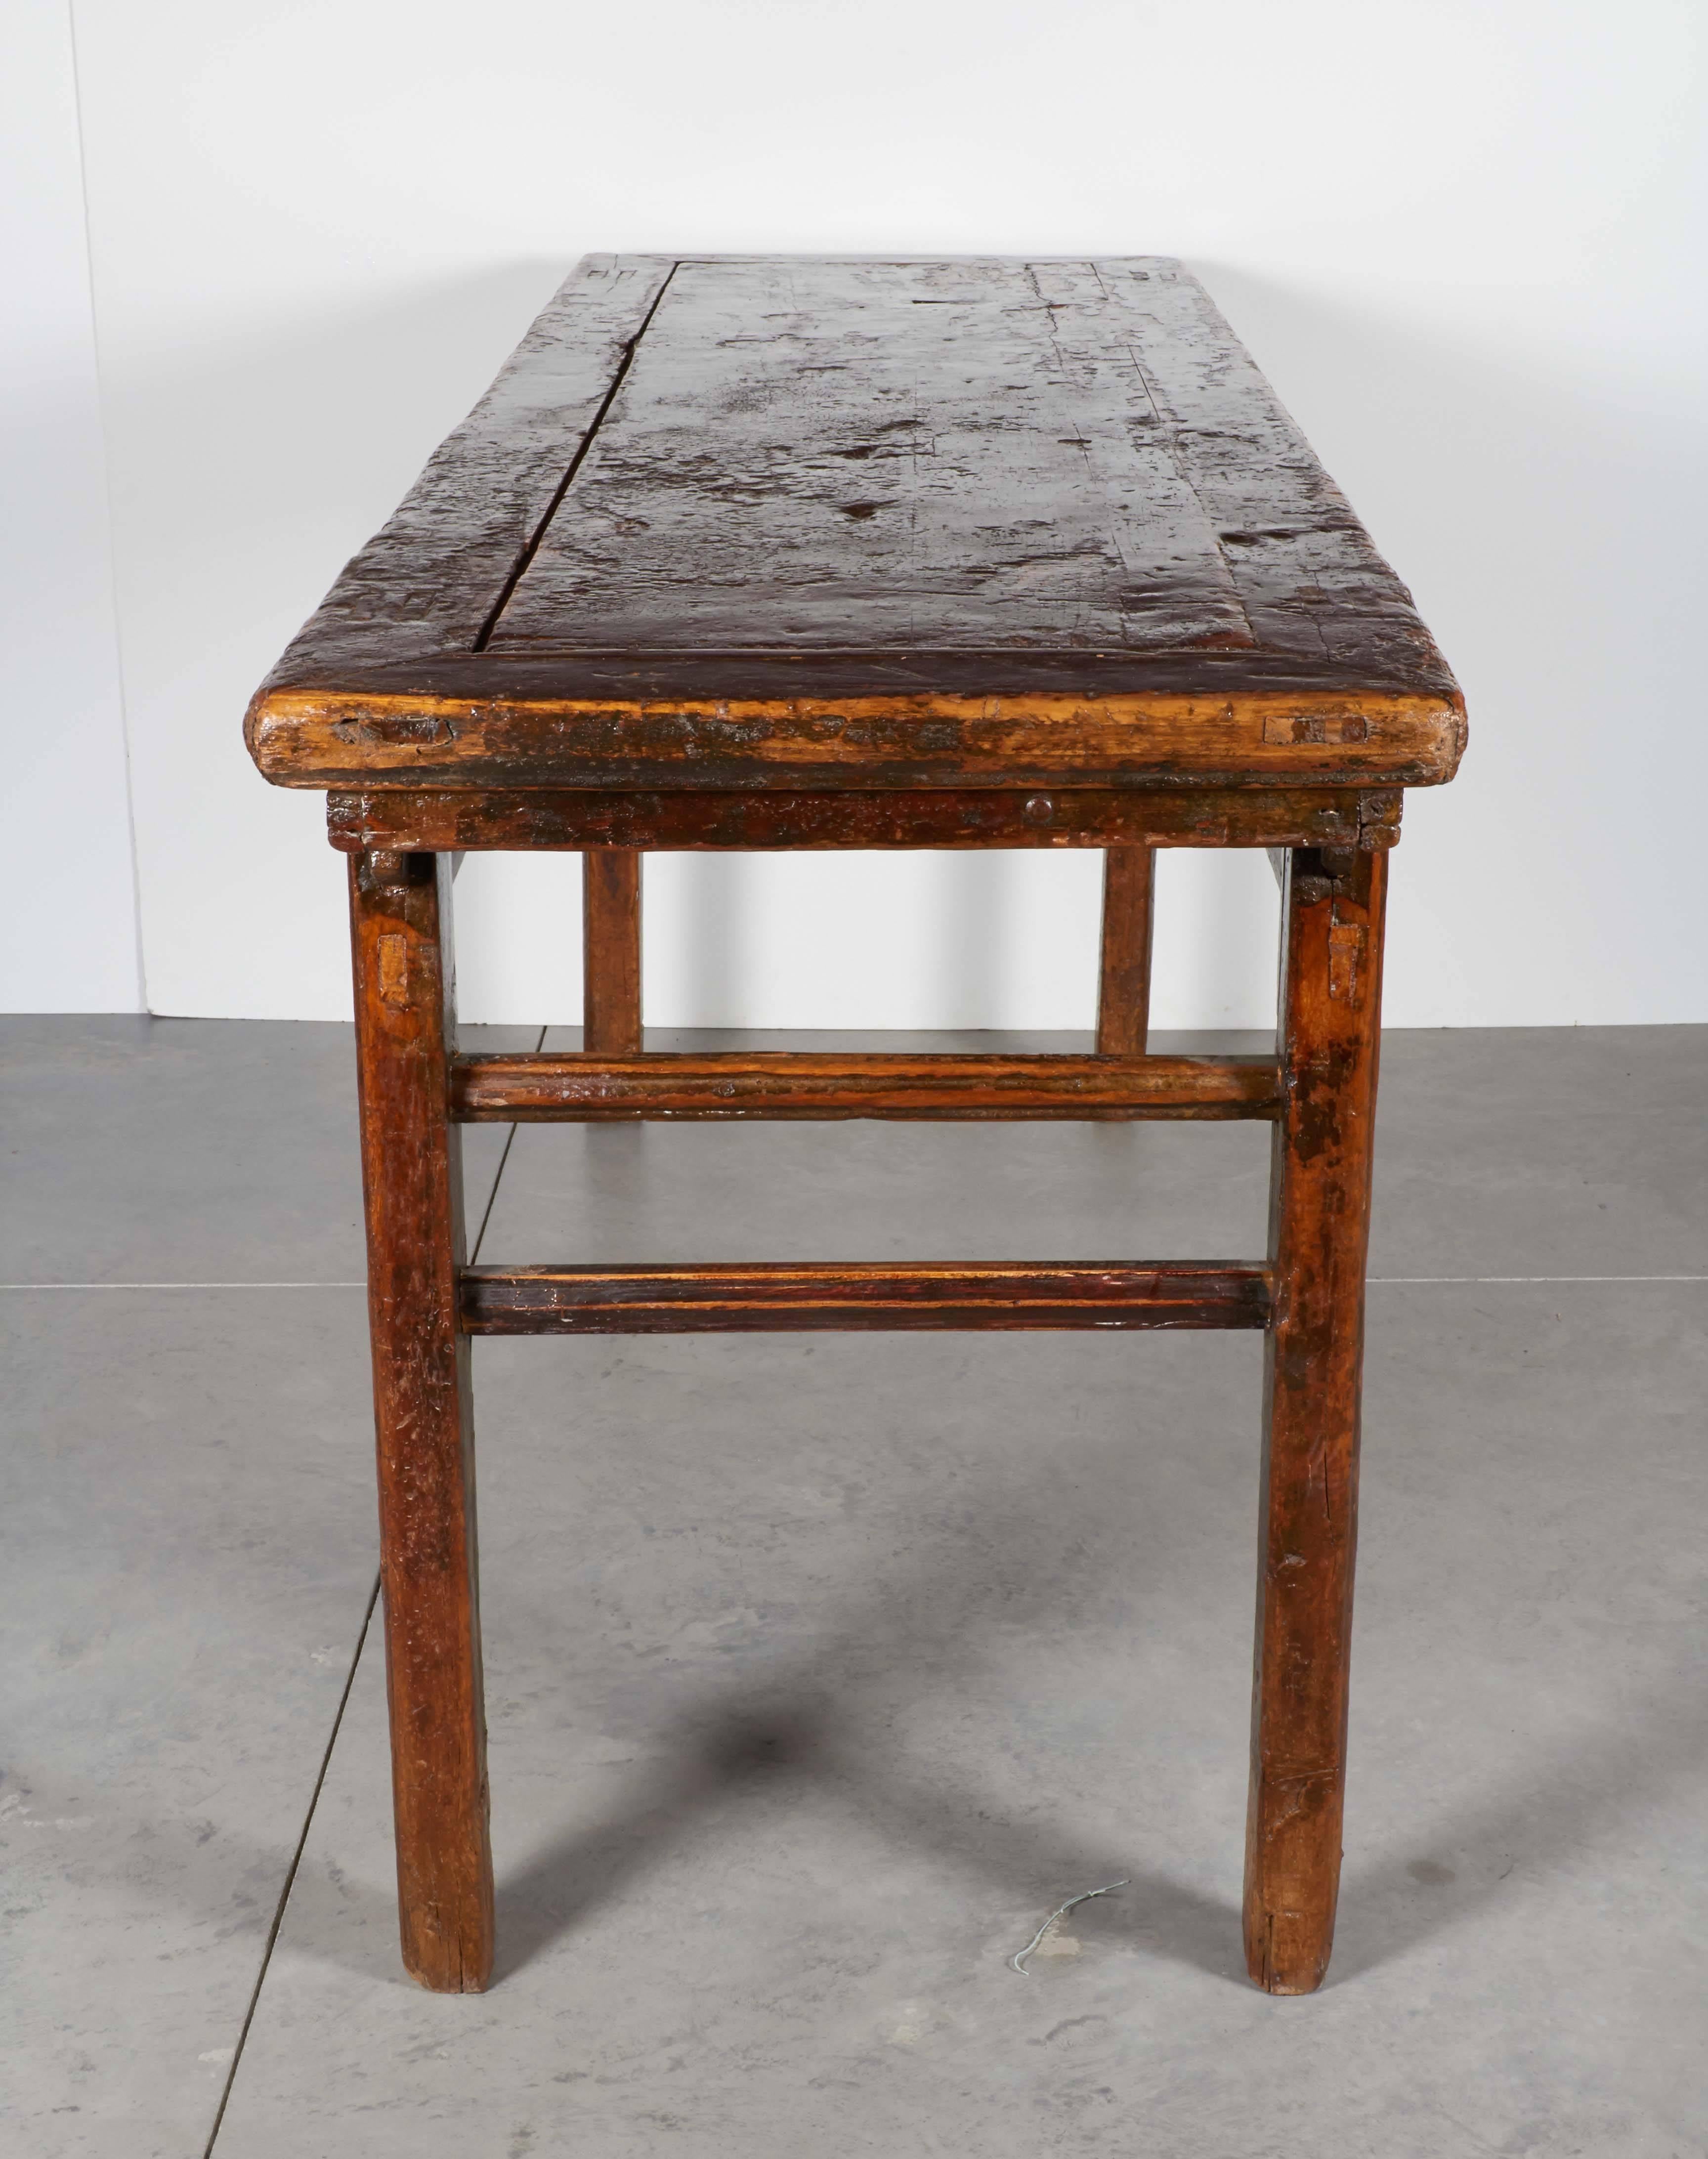 Pine Heavily Lacquered Rustic Antique Painting Table